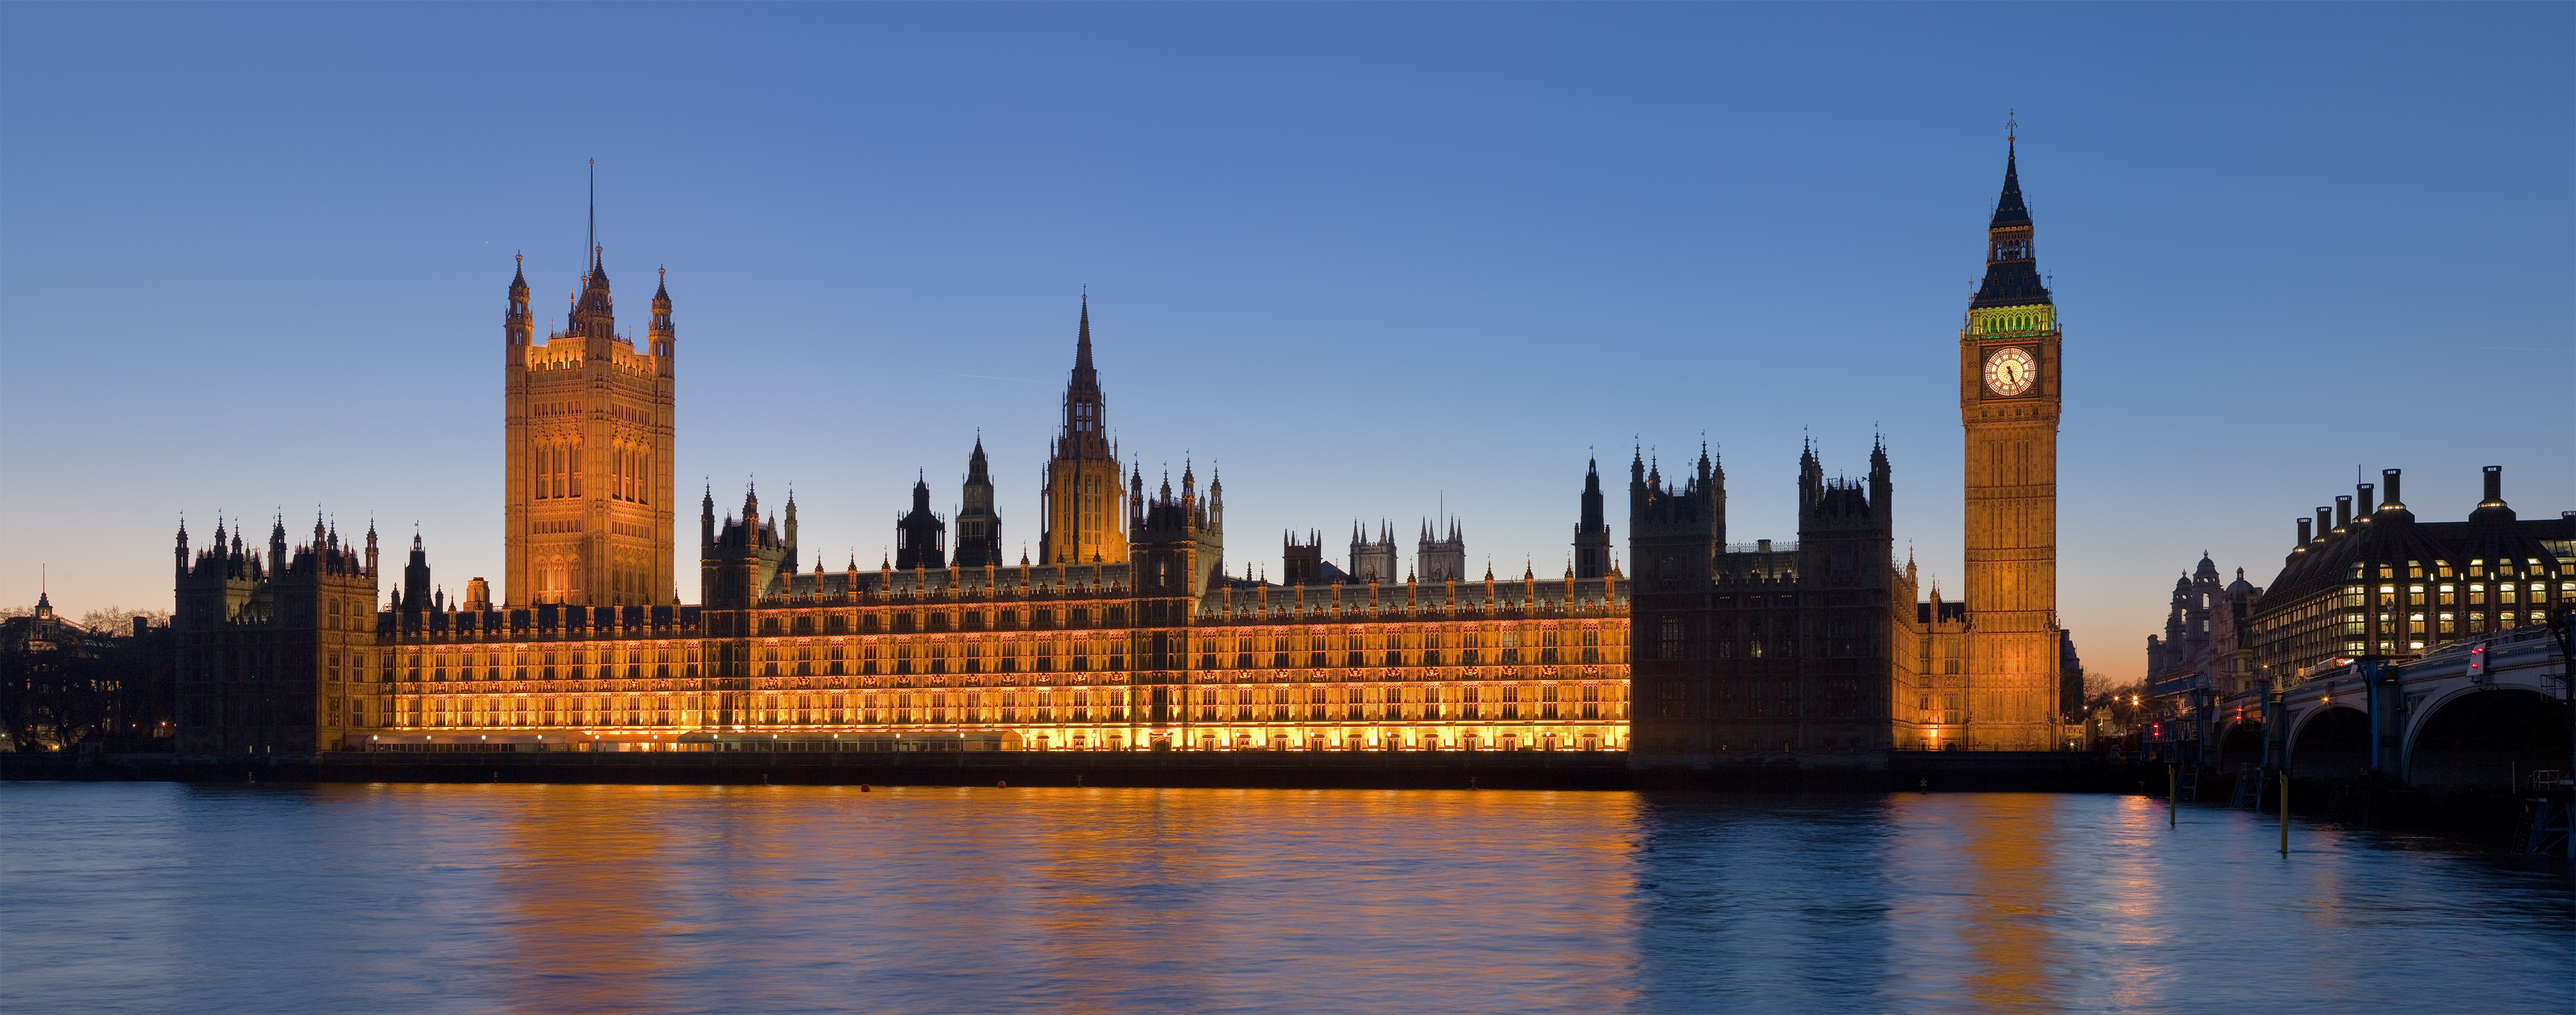 112: Palace of Westminster | OHS APAH